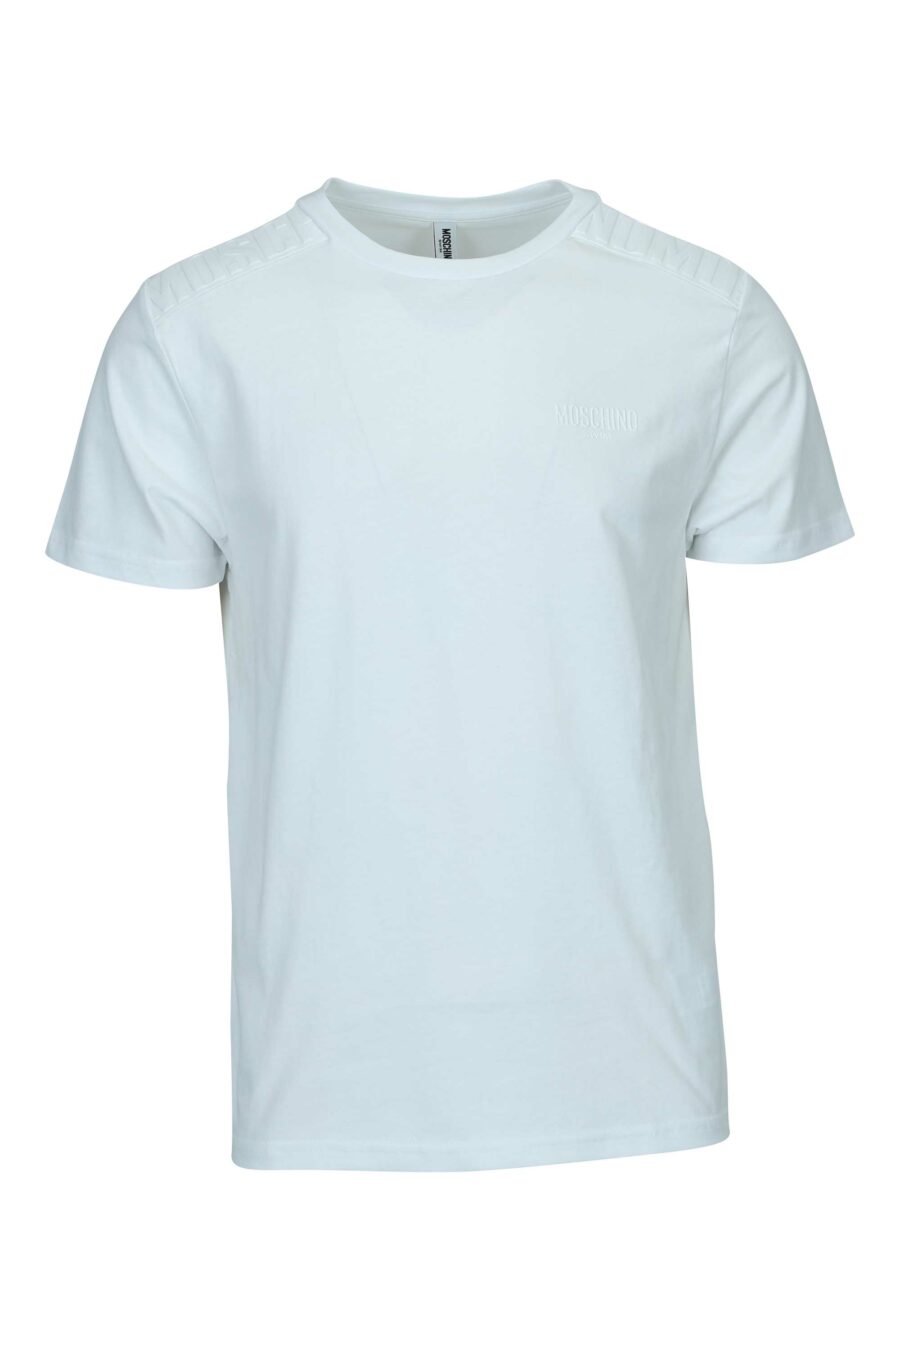 White T-shirt with monochrome rubber logo on shoulders - 667113671932